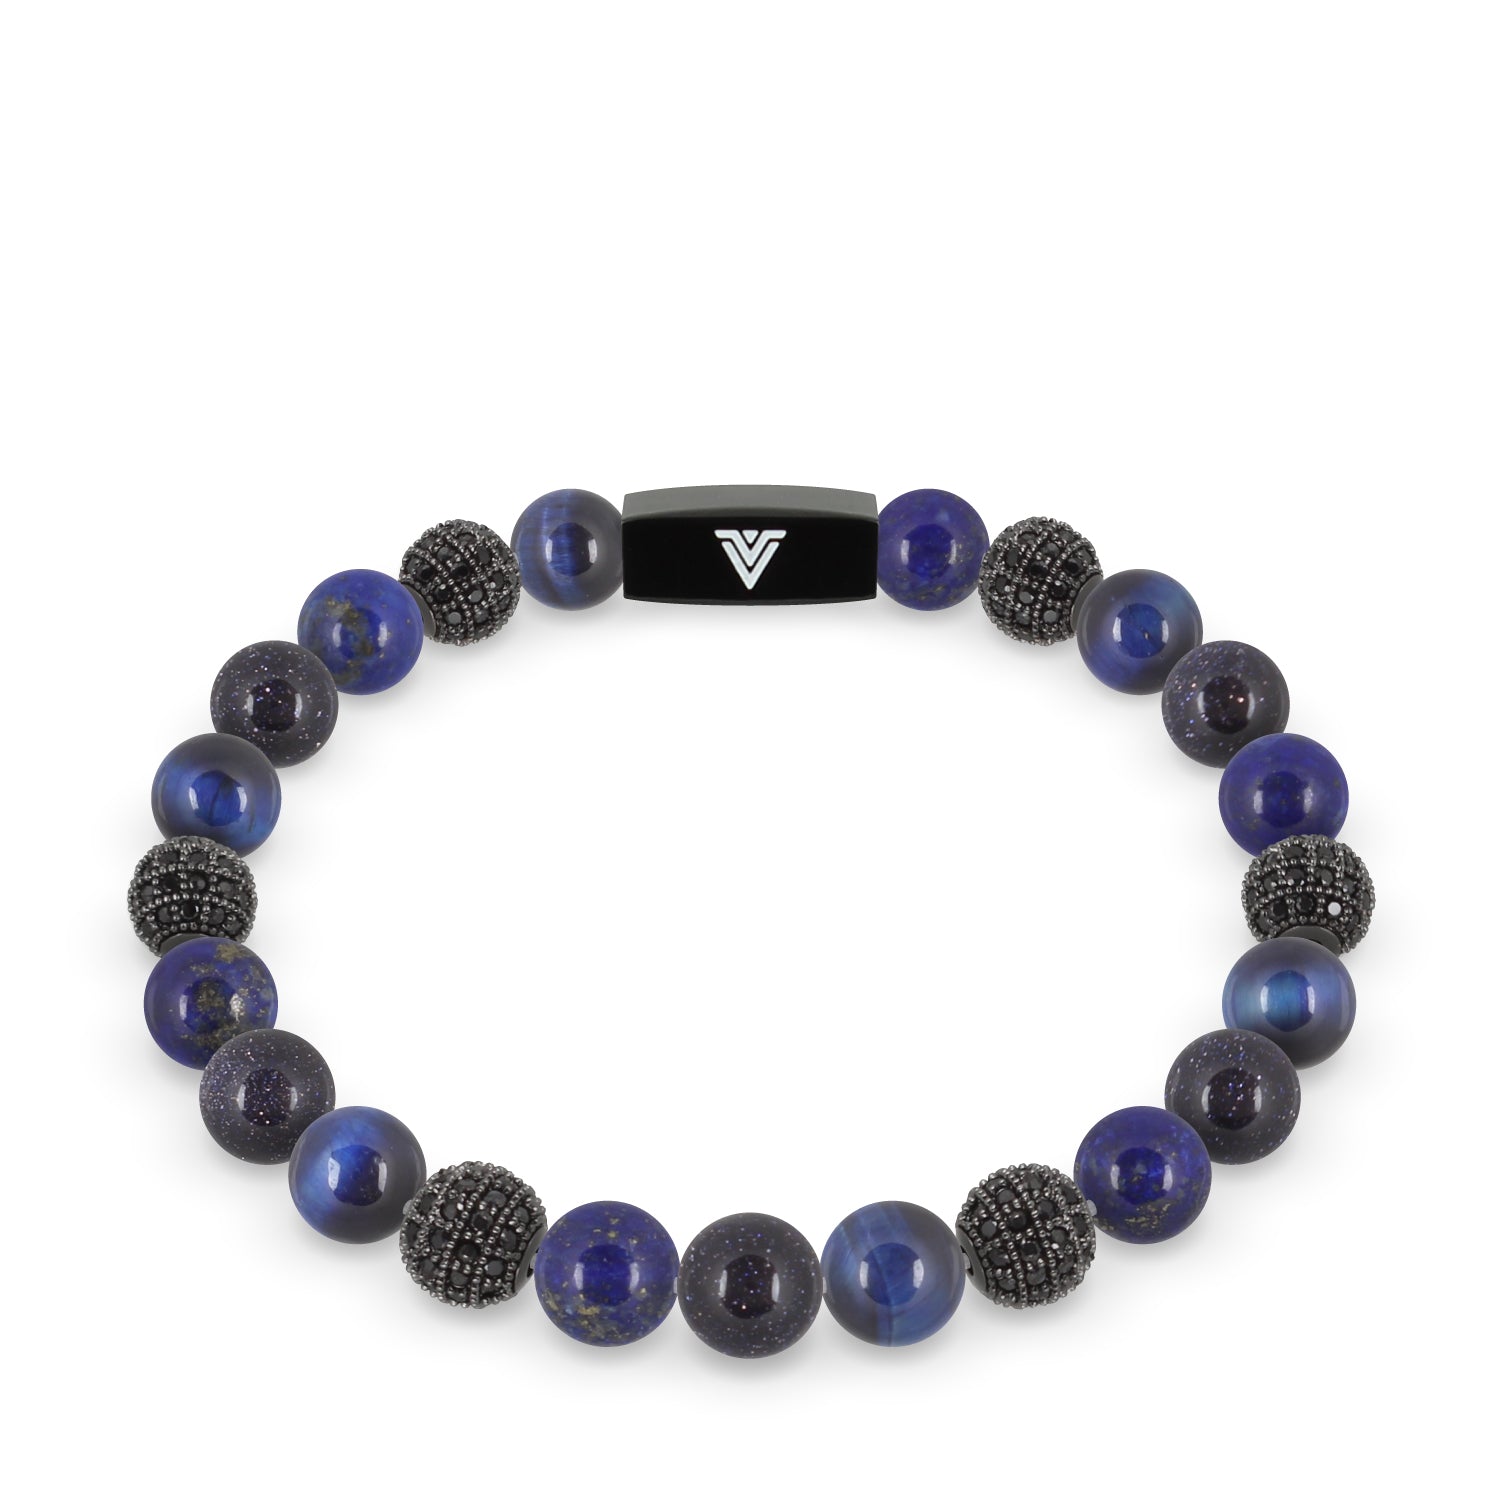 Front view of an 8mm Blue Sirius beaded stretch bracelet featuring Blue Tiger’s Eye, Black Pave, Lapis Lazuli, & Blue Goldstone crystal and black stainless steel logo bead made by Voltlin